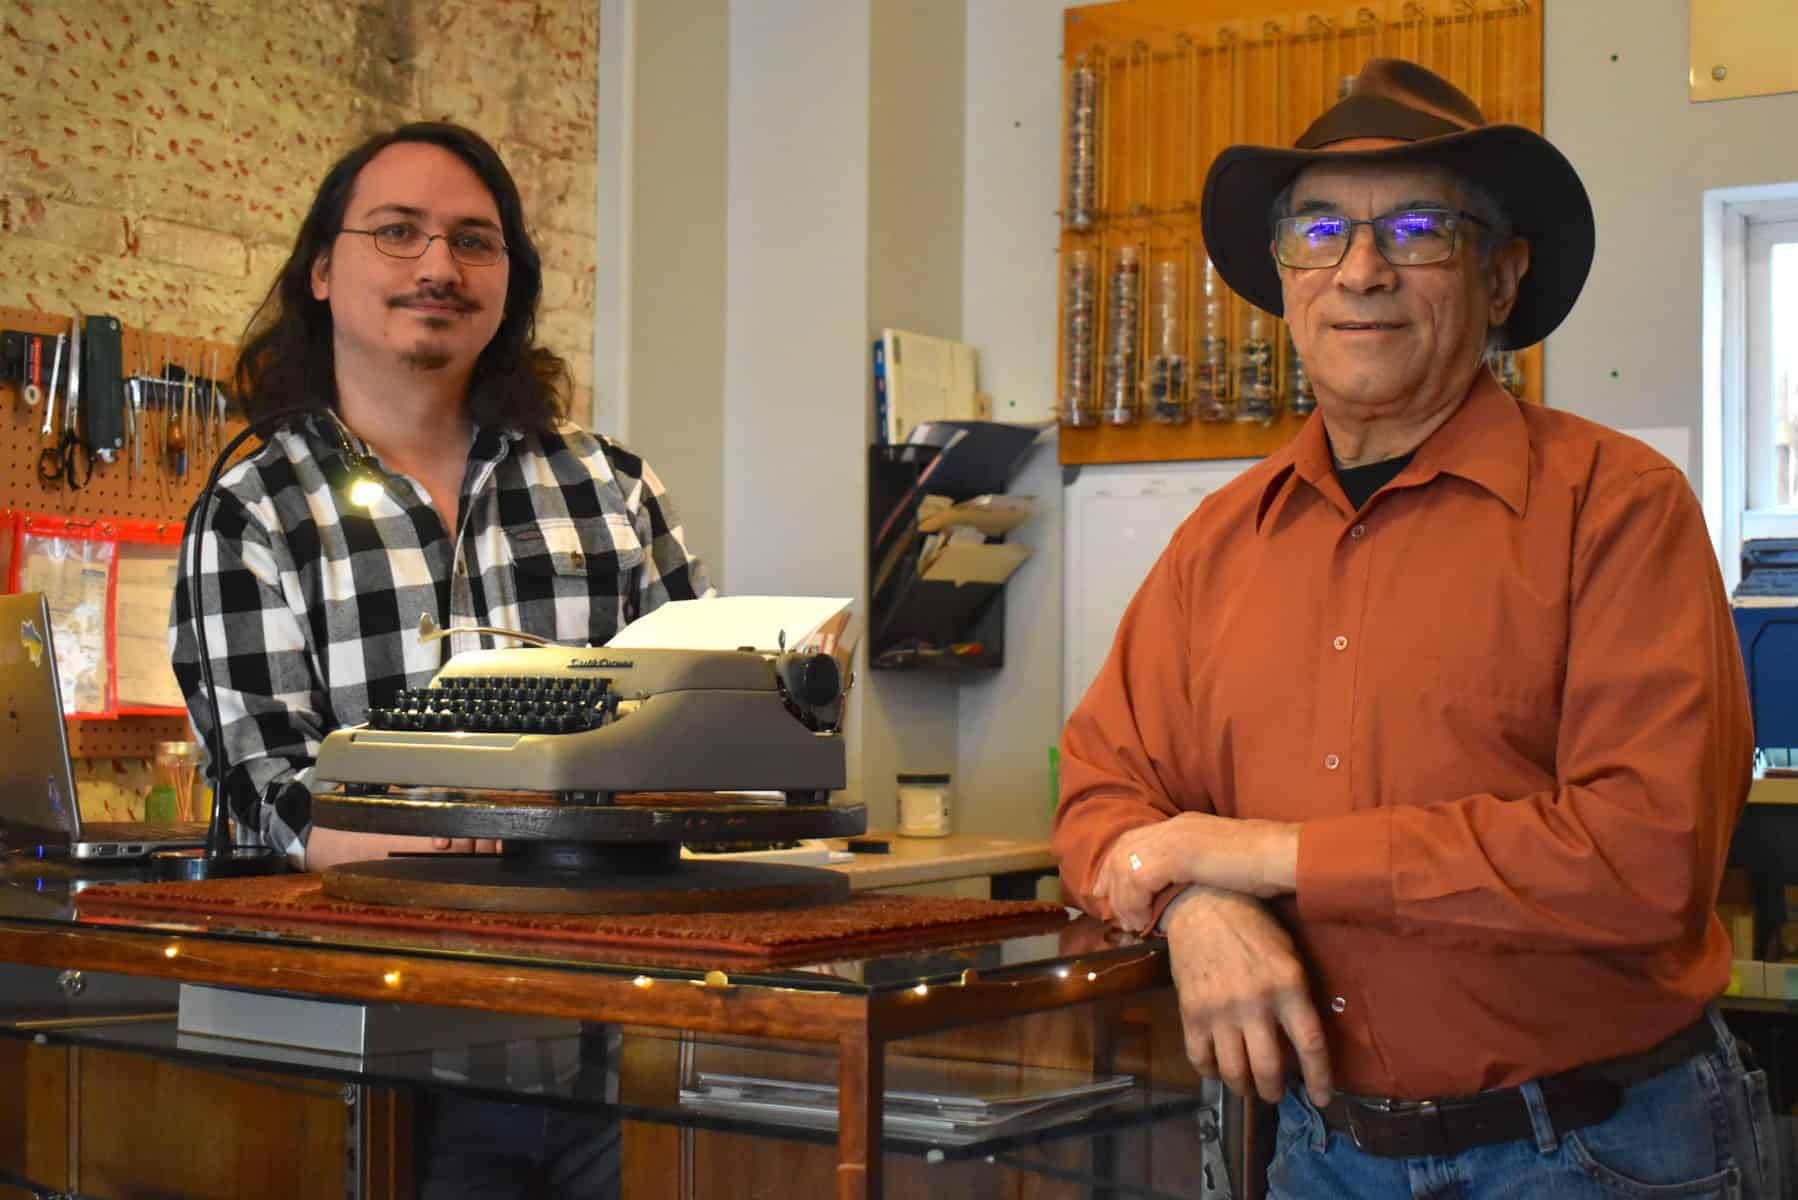 East Passyunk shop receives rare gift from celebrity